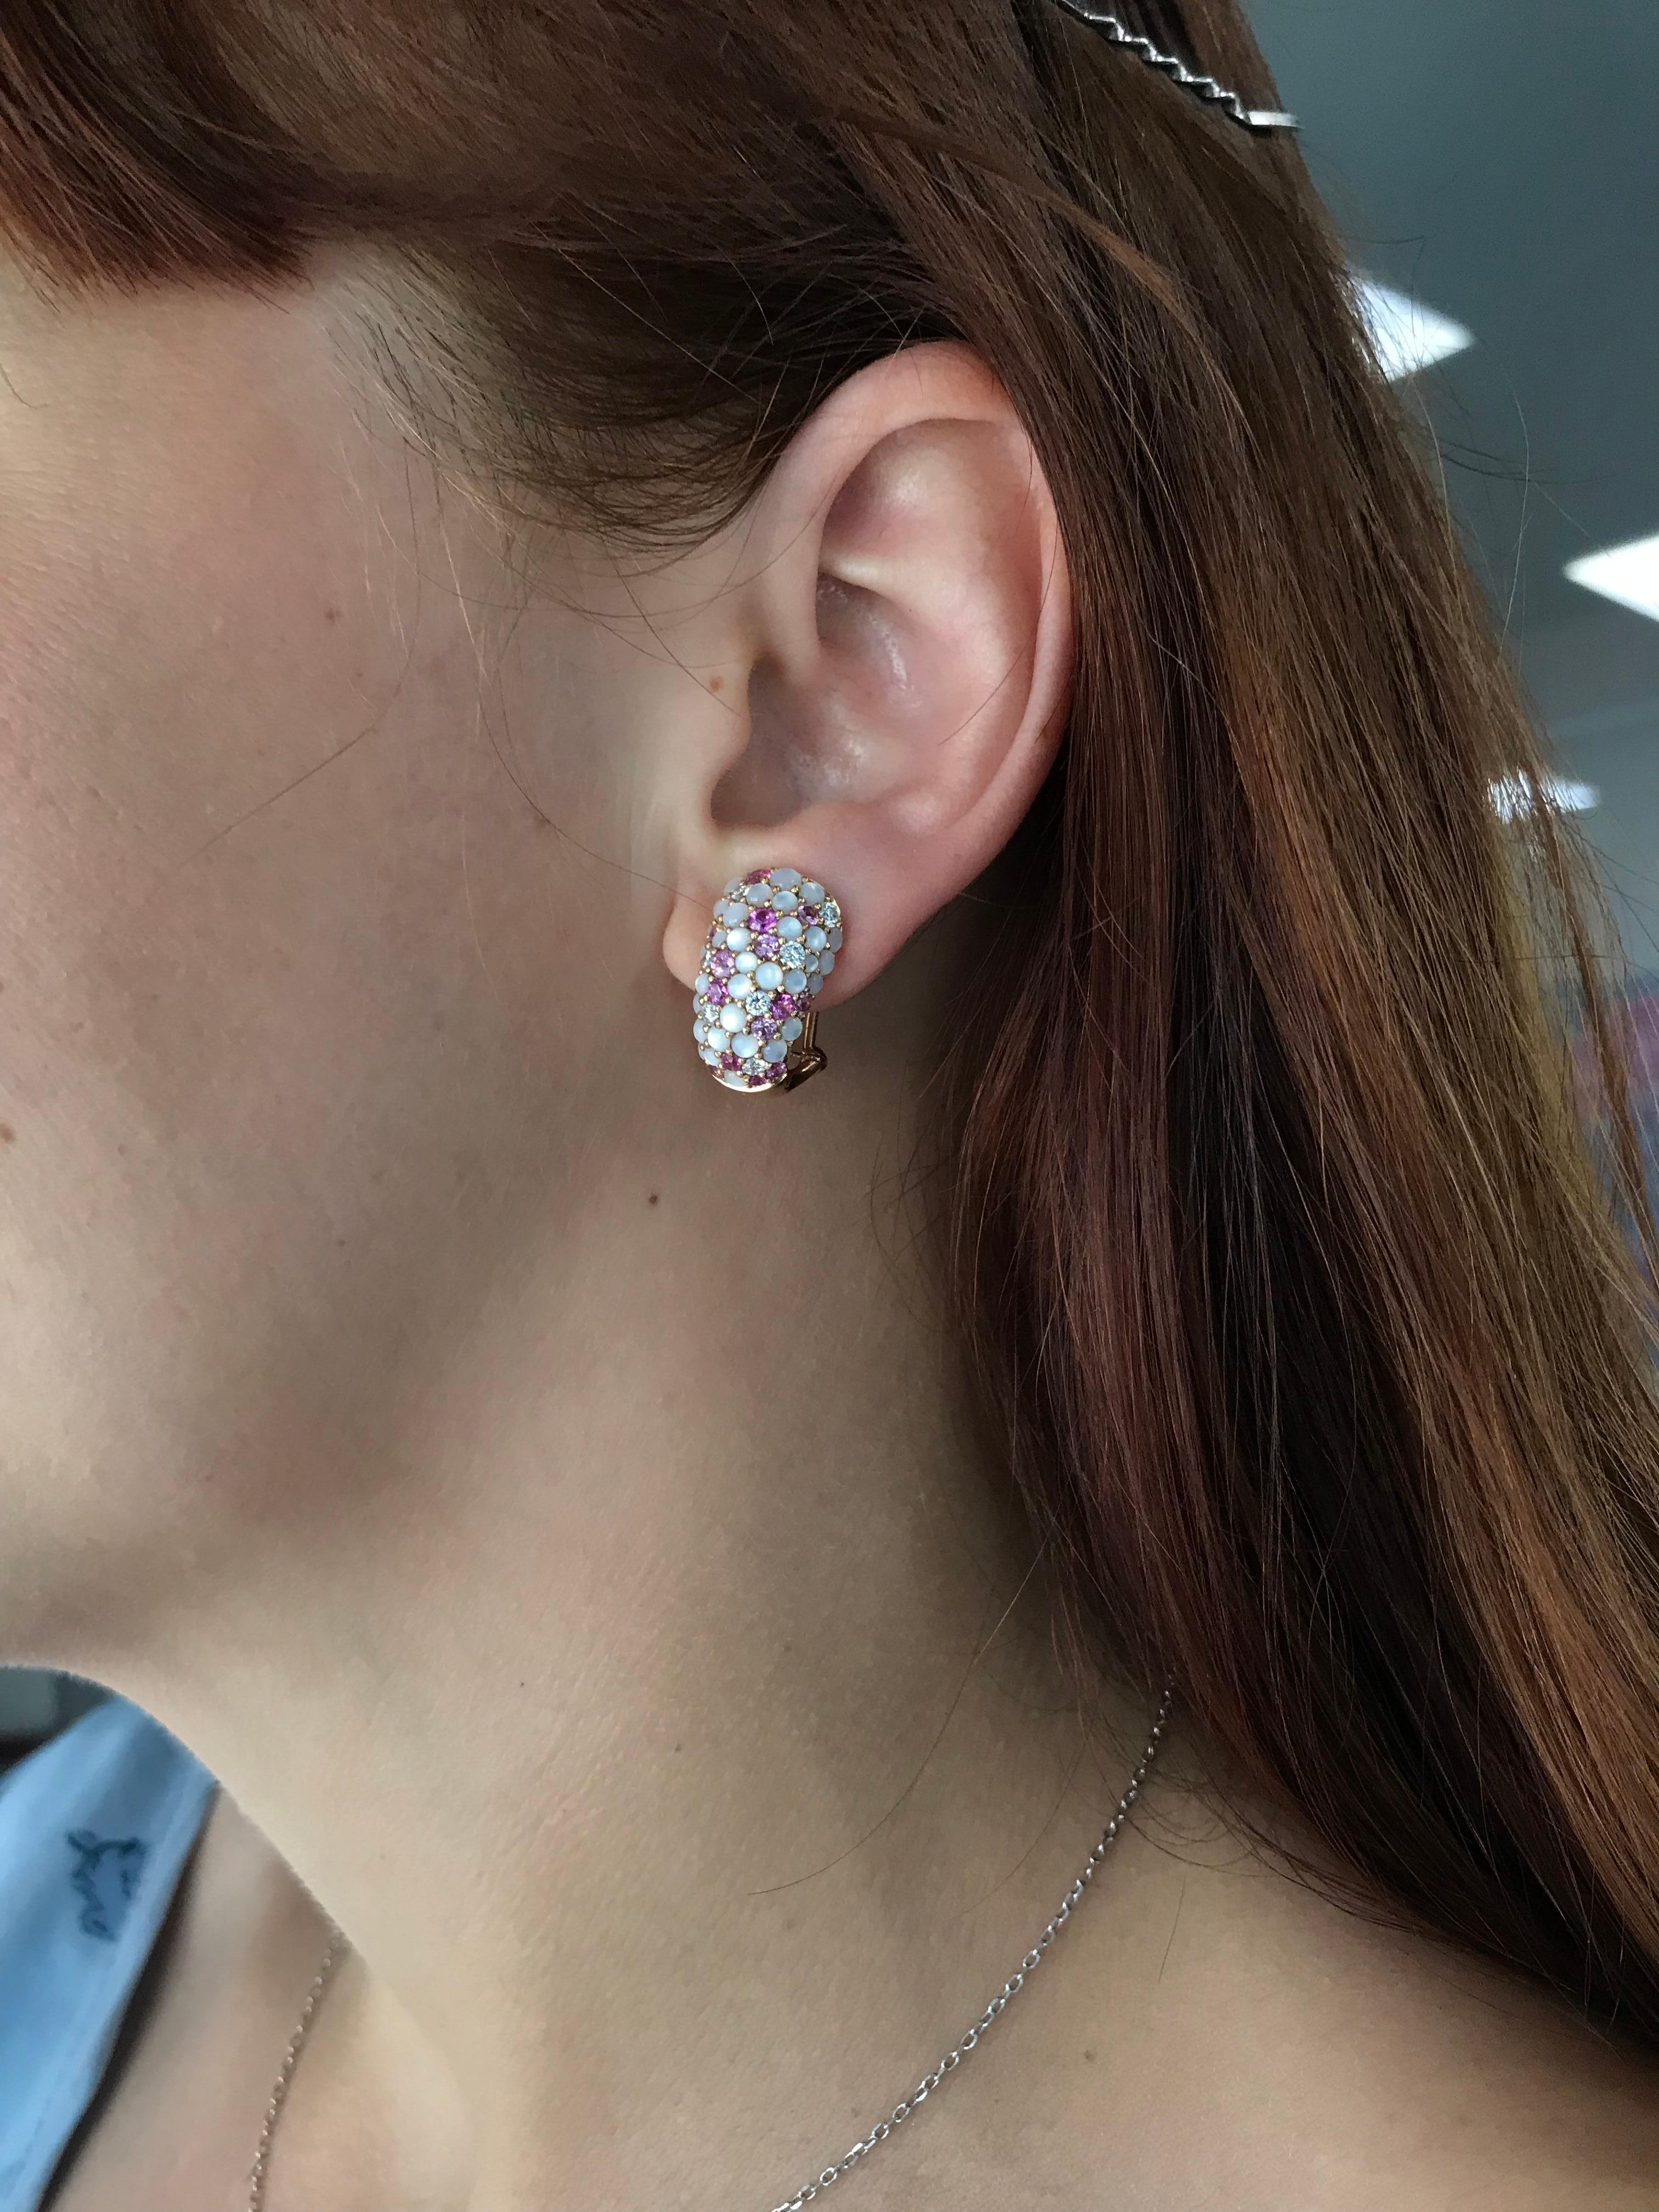 The gentle pink tones of these stones are inspired by the delicate flourishing nature and flowers decorating the Mediterranean panorama. So gentle, fresh and delicate.
These earrings are made to refresh the face and make you look like you just came